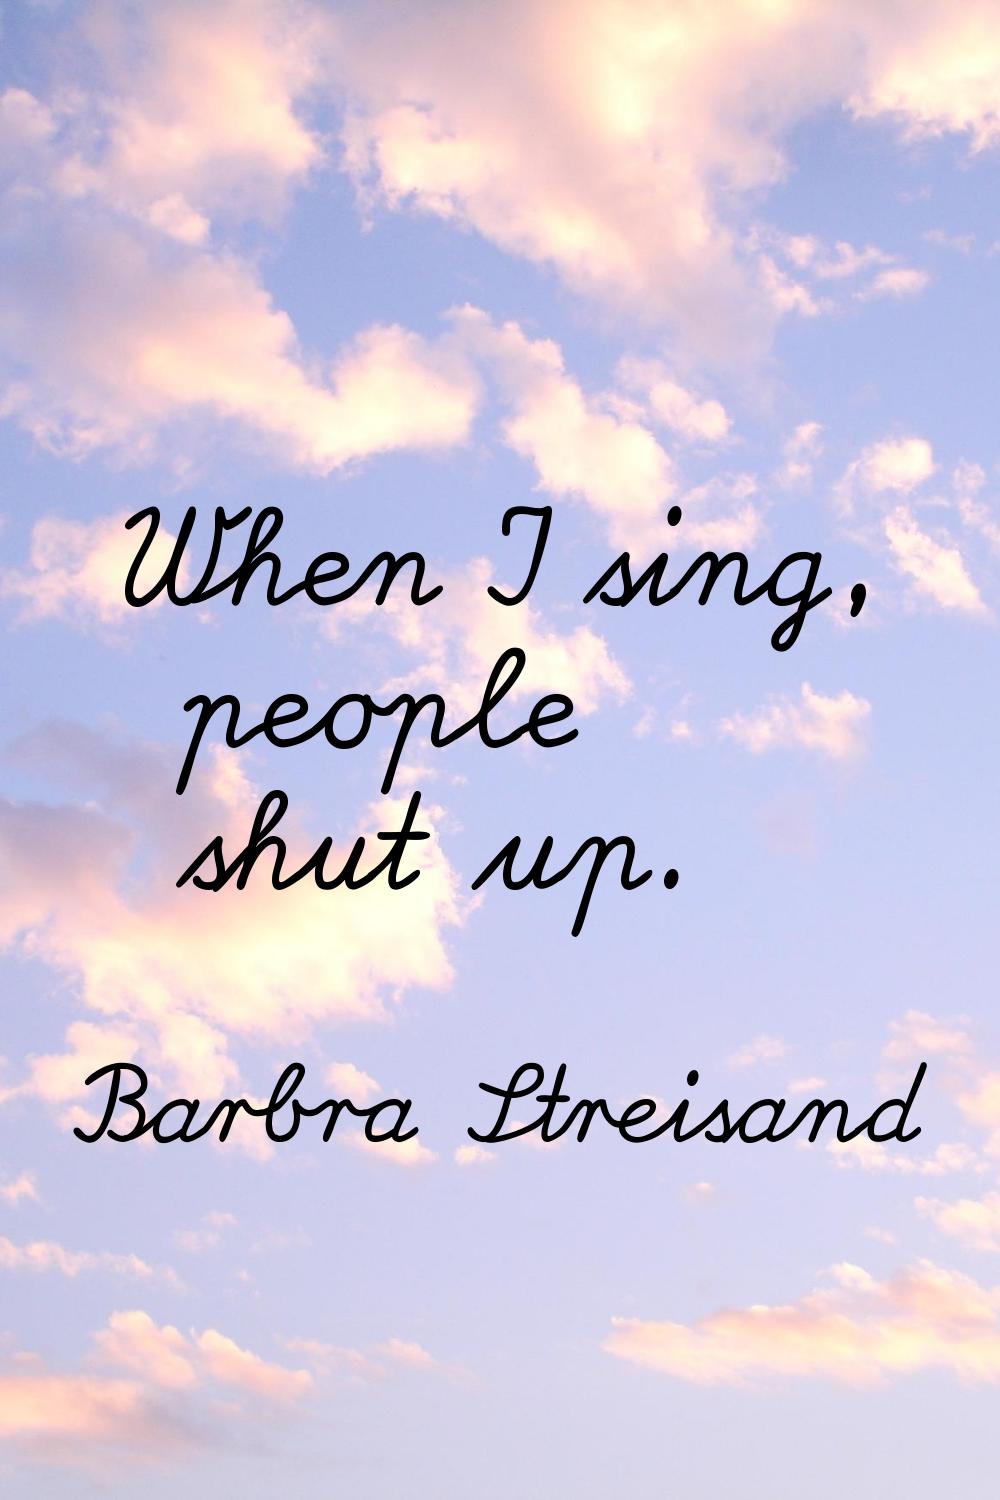 When I sing, people shut up.